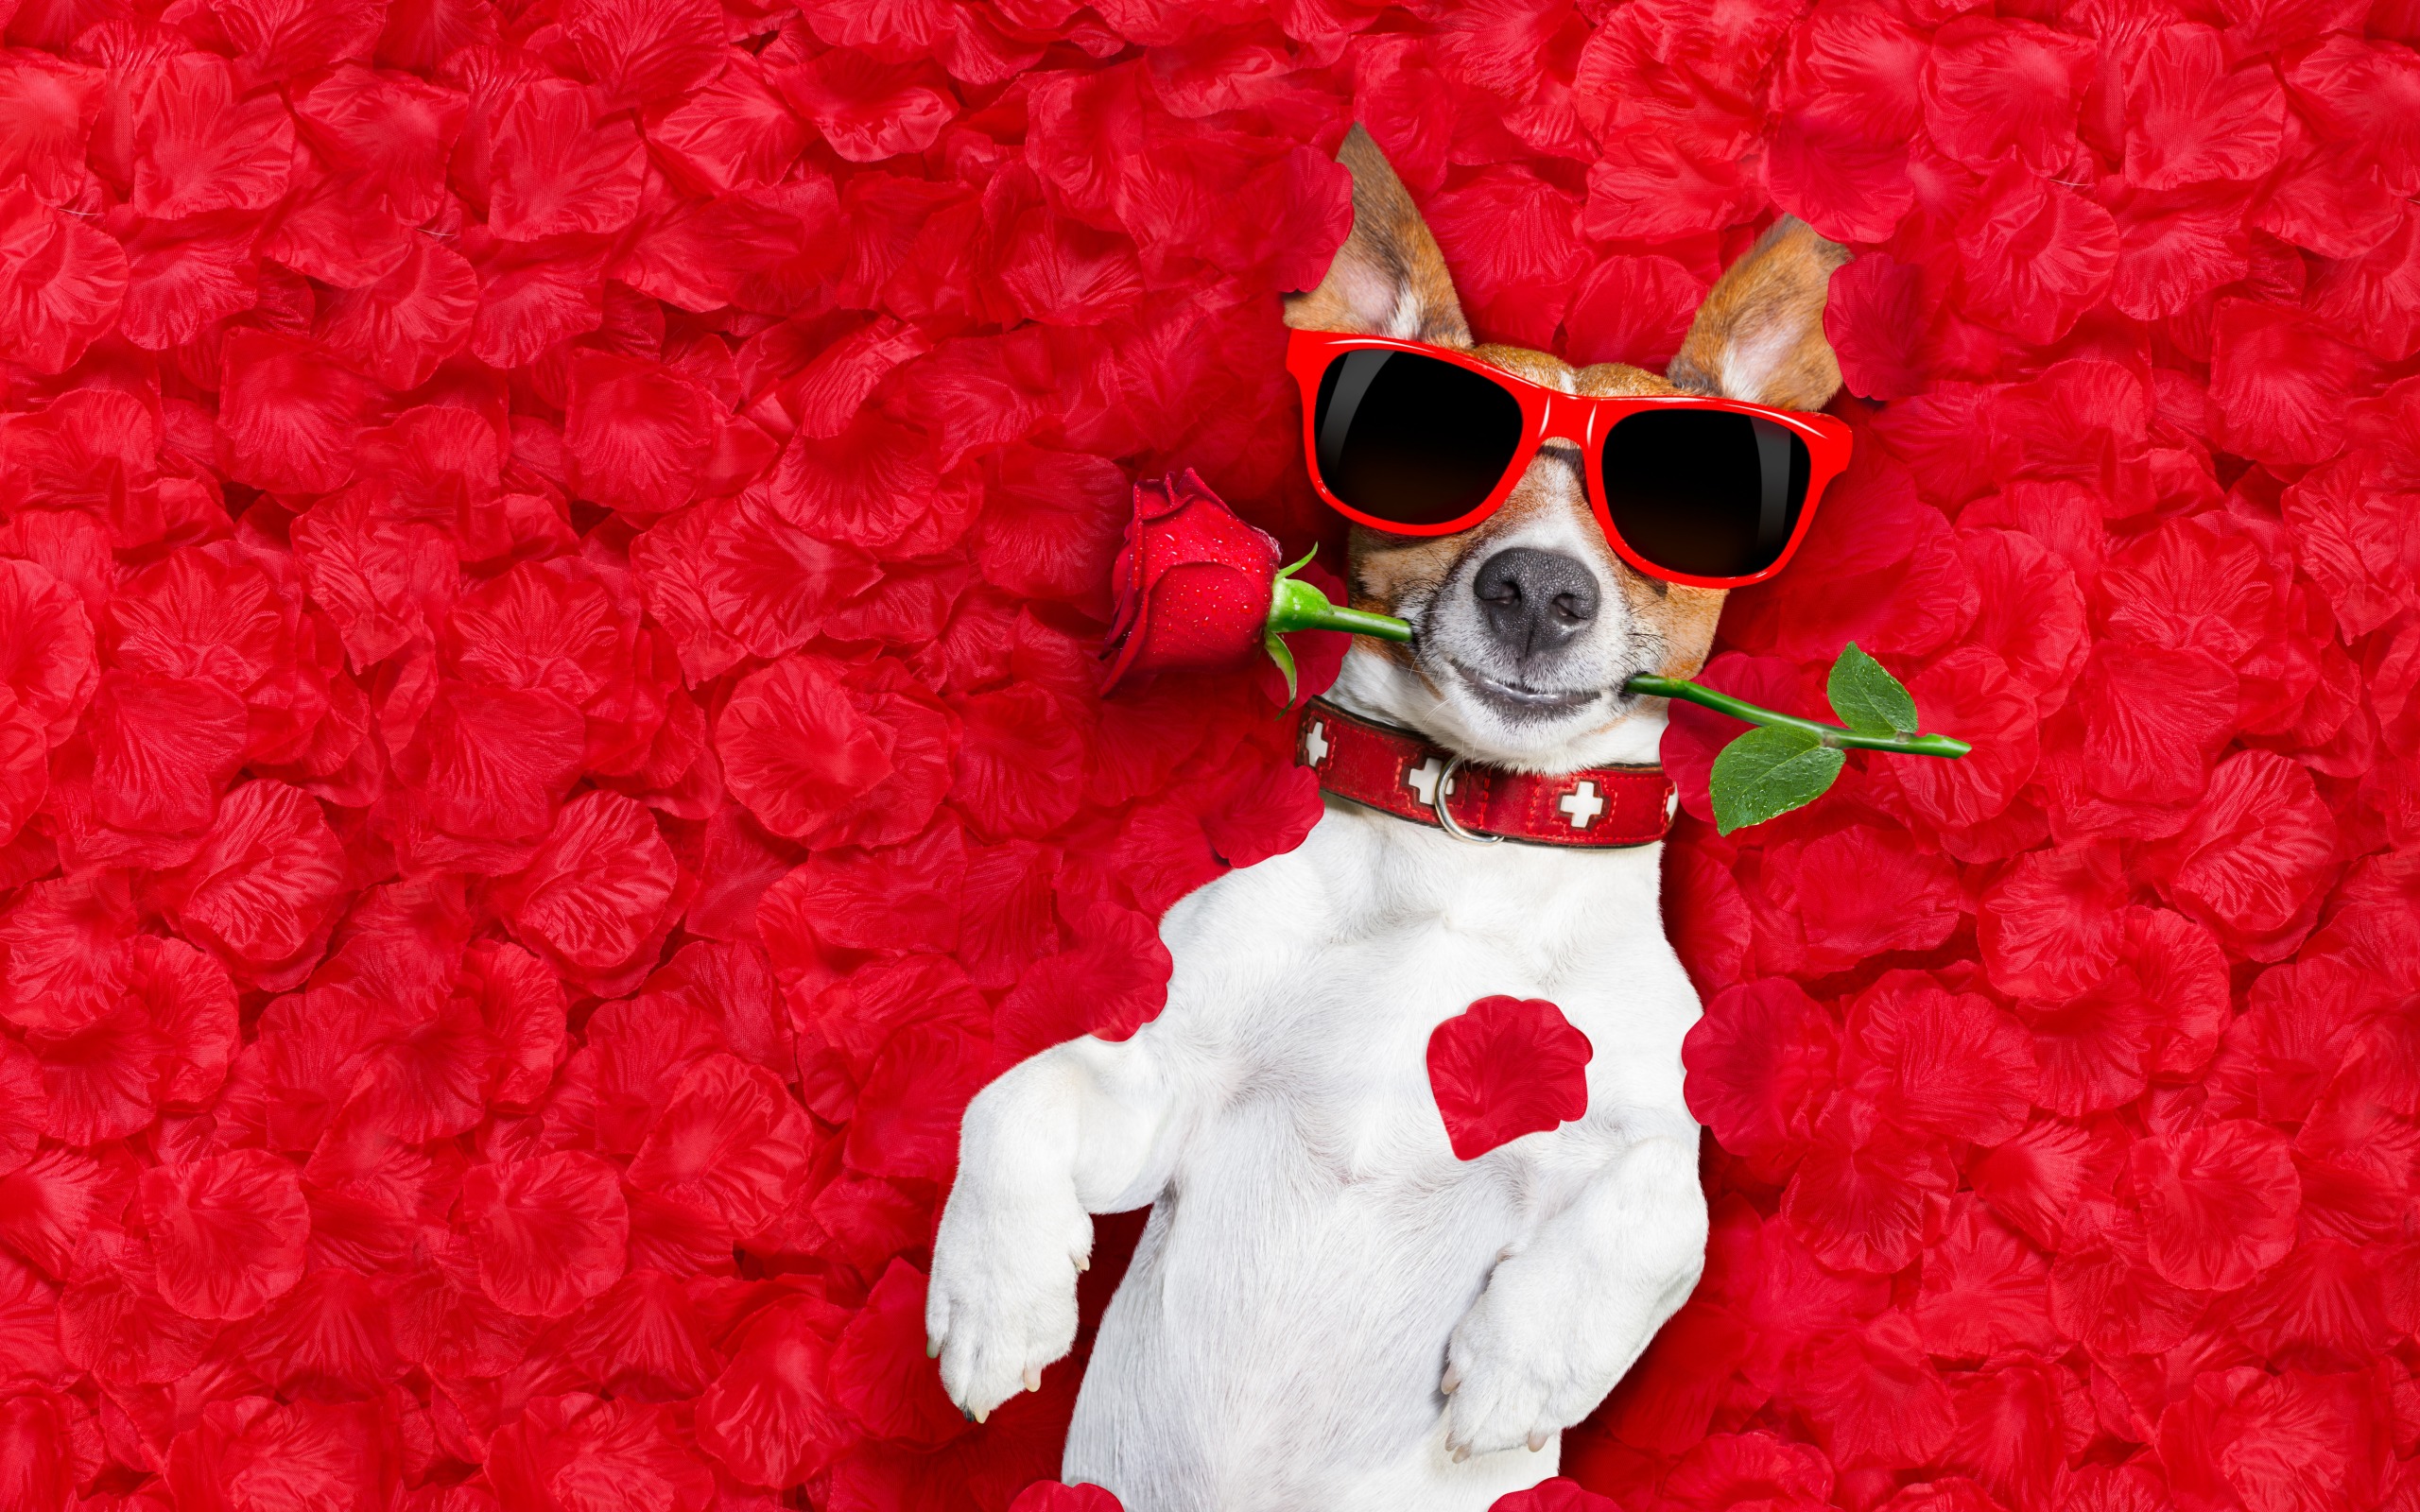 jack russell terrier, red rose, animal, dog, humor, petal, sunglasses, dogs